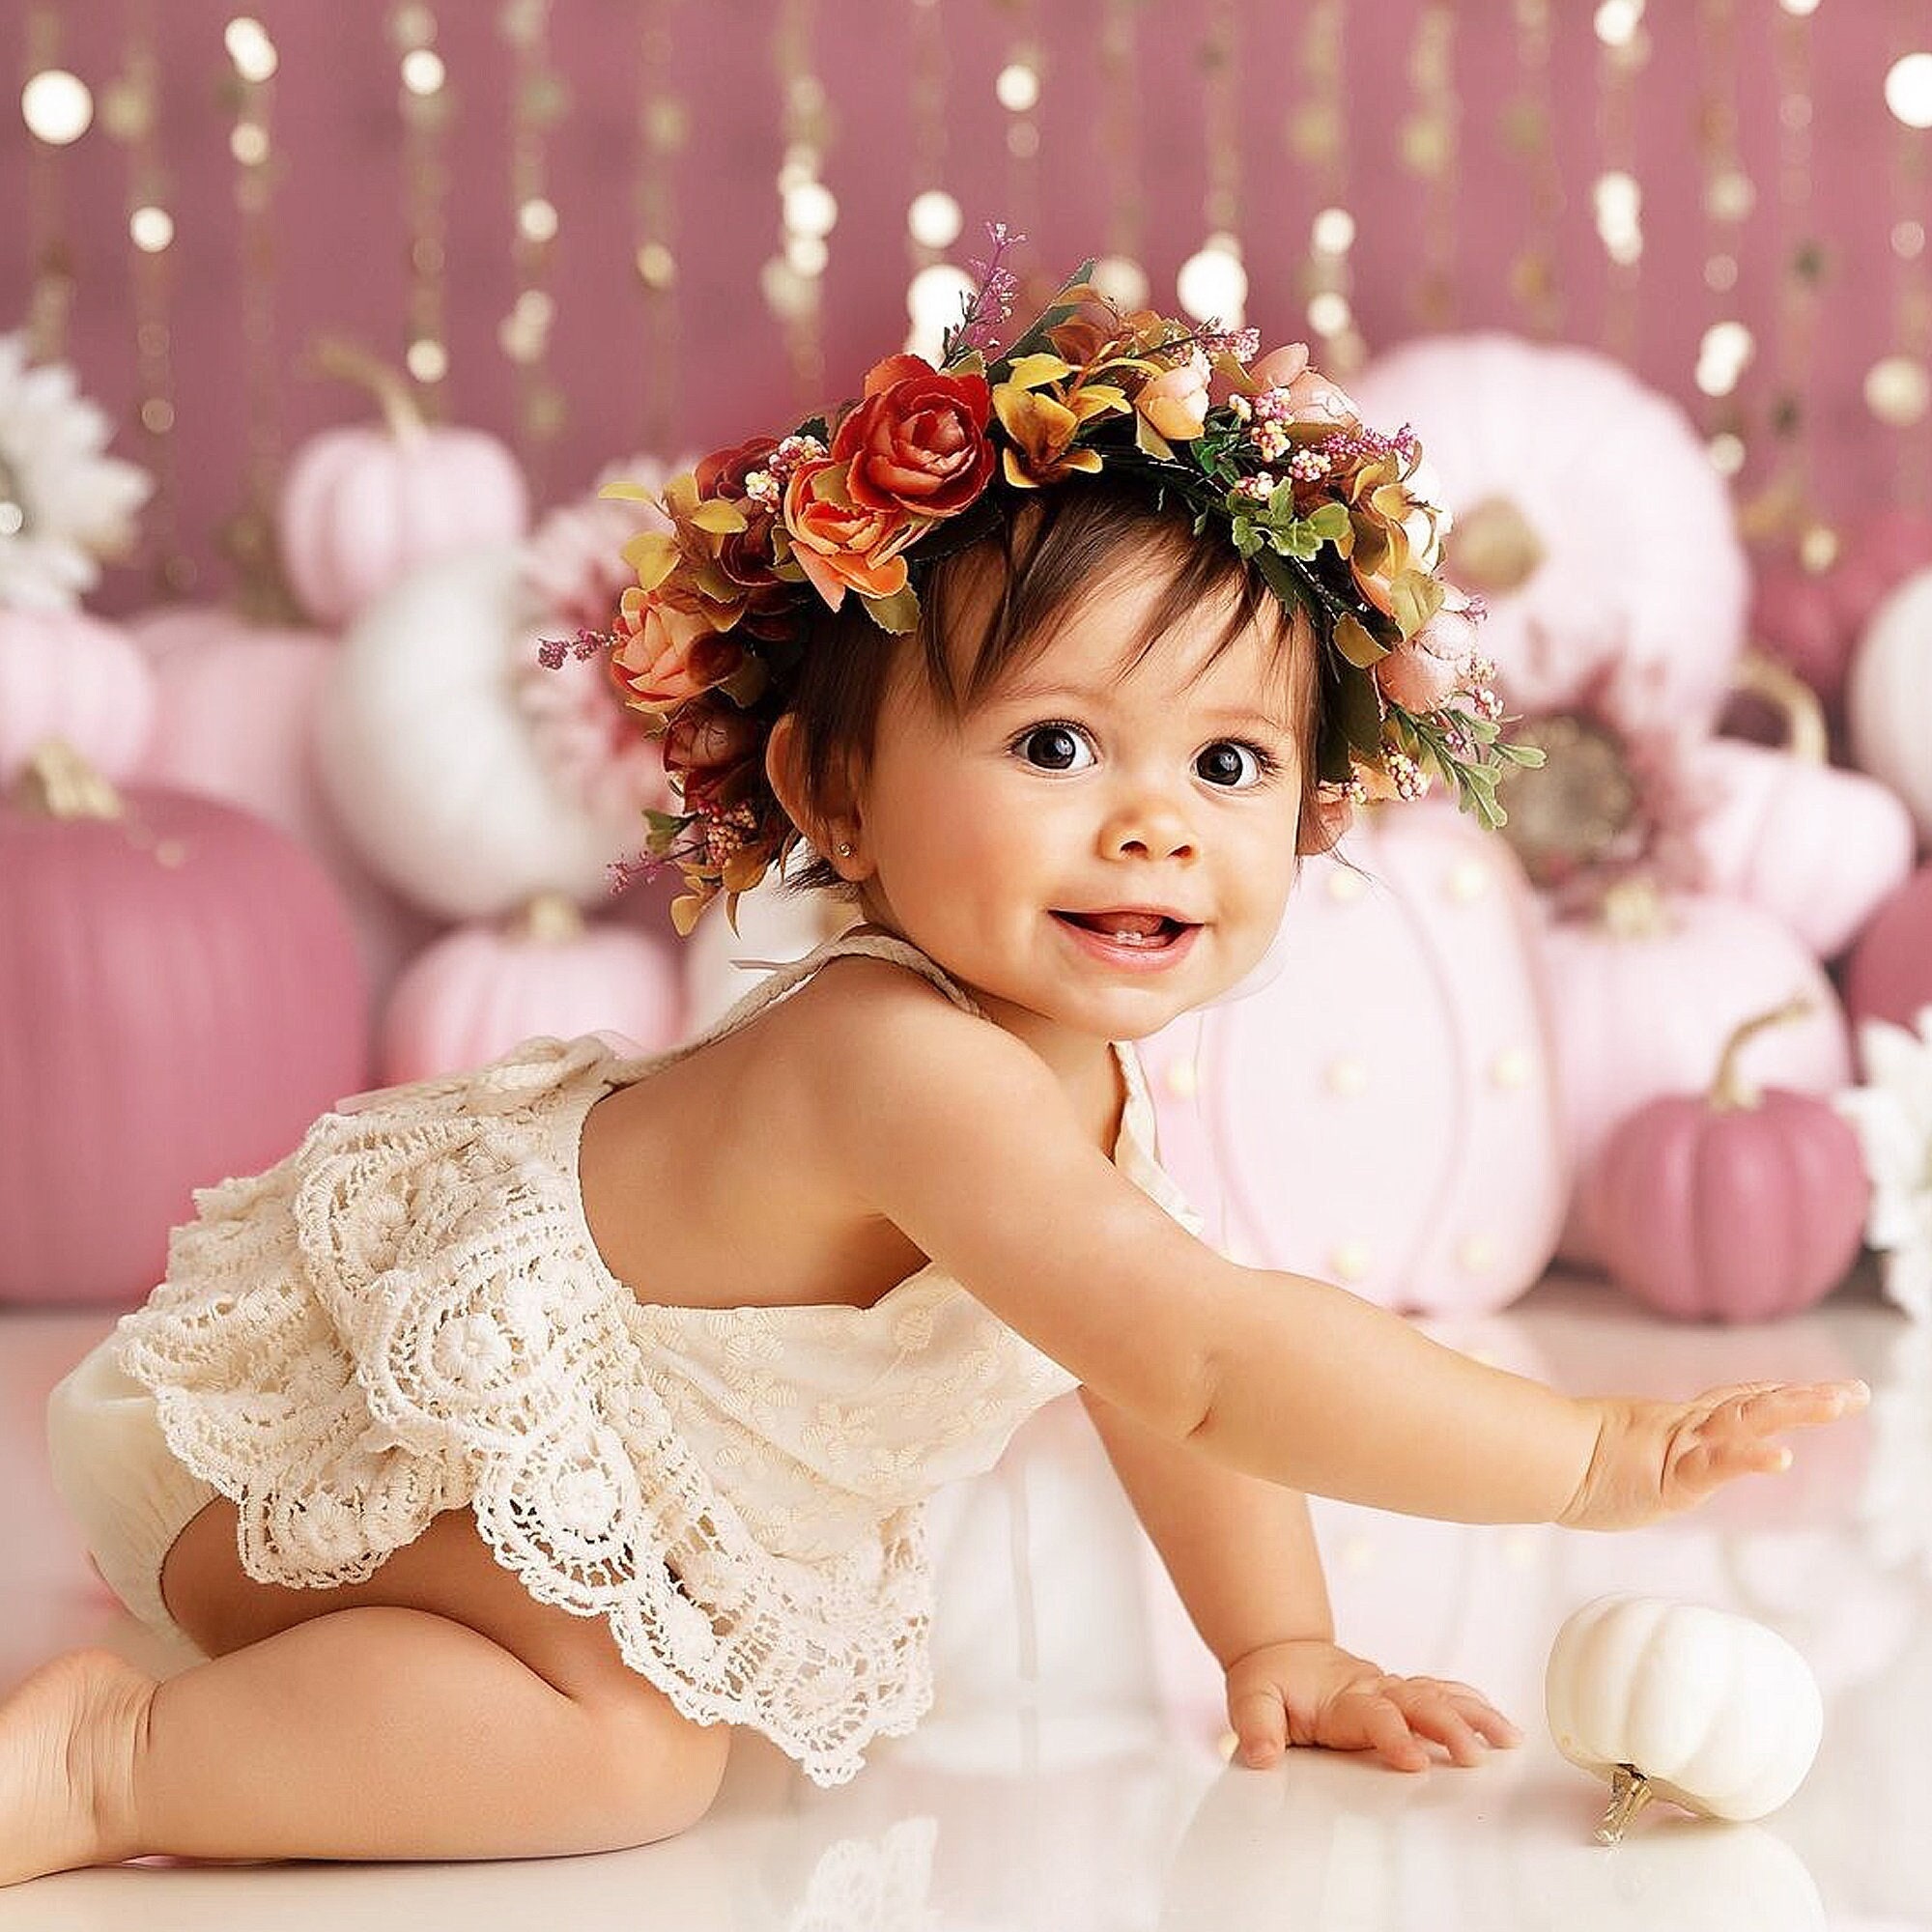 Baby Girl Photoshoot Outfits for Newborn Boy Photo Props Baby Photography Outfit Girl Lace Flower Headdress